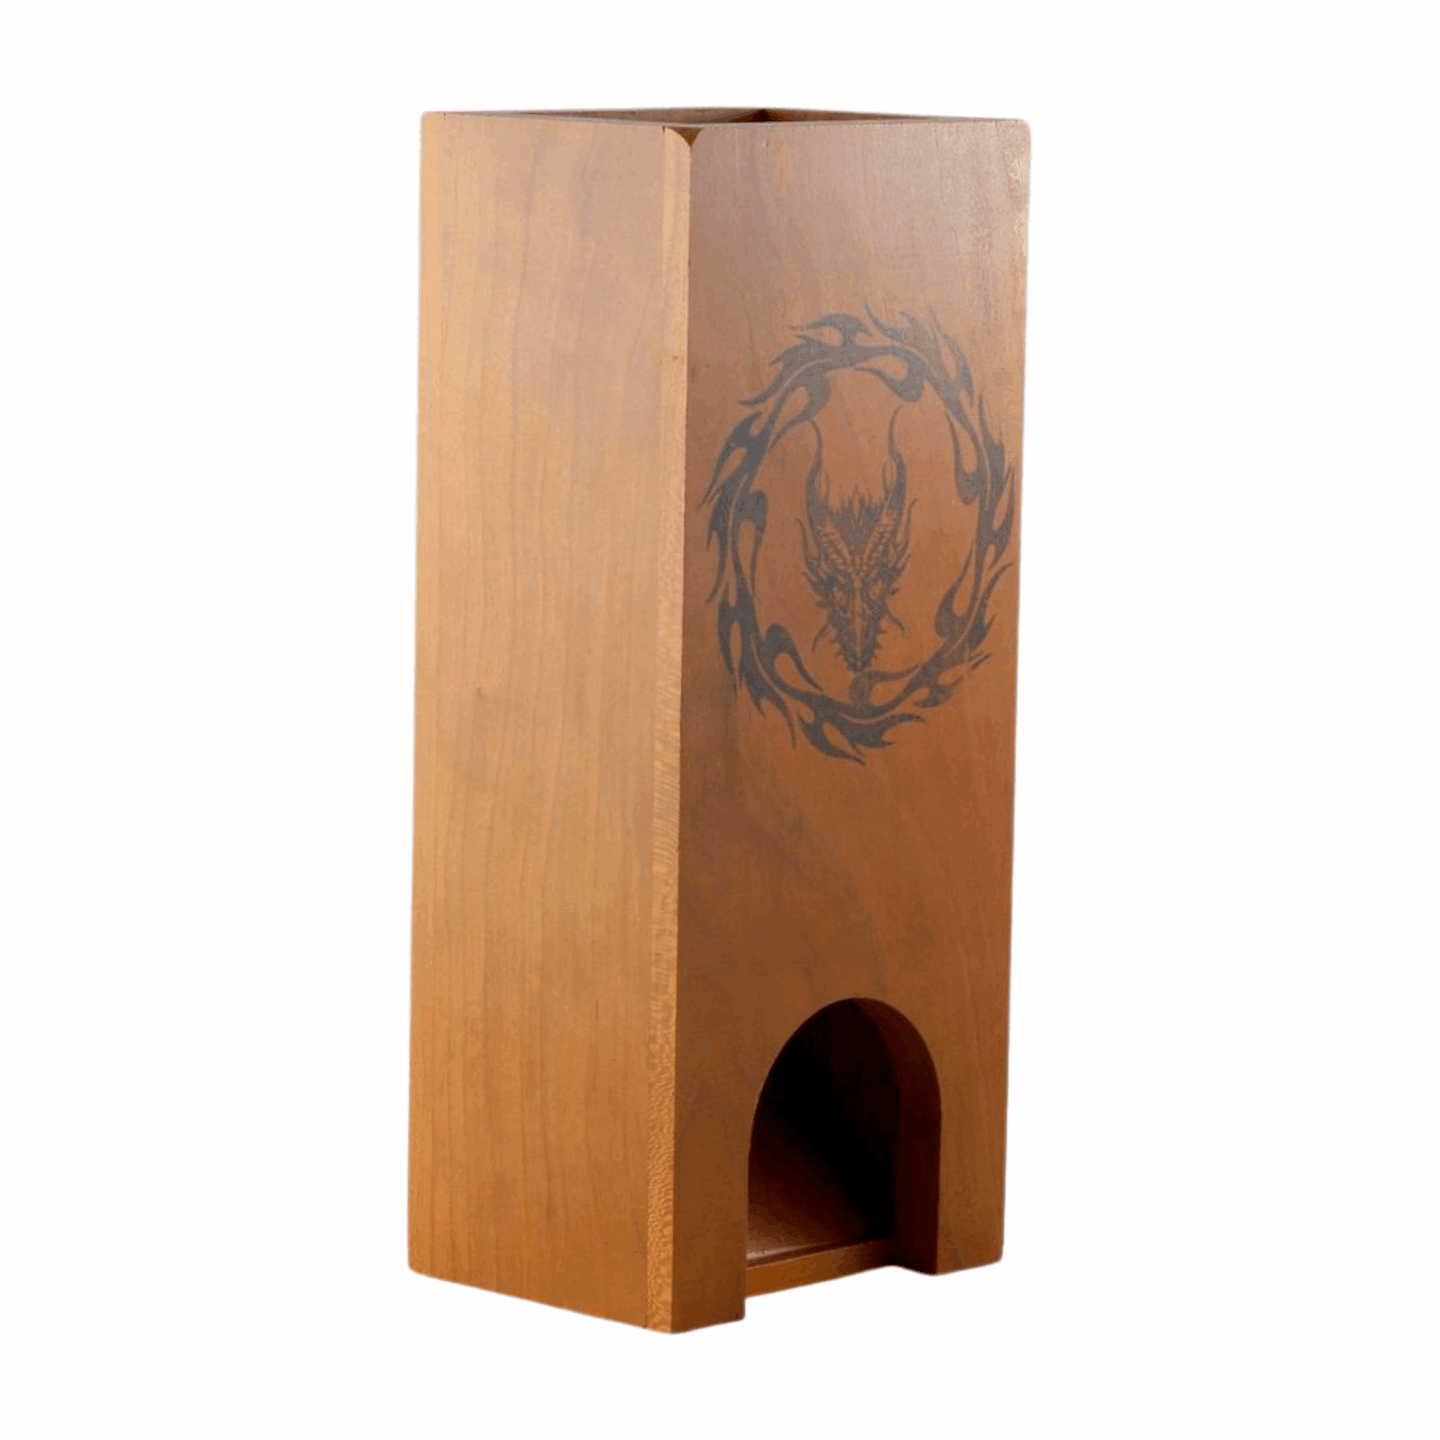 Cherry Dice Tower with Dragon Encircled in Flames - Dragon Armor Games